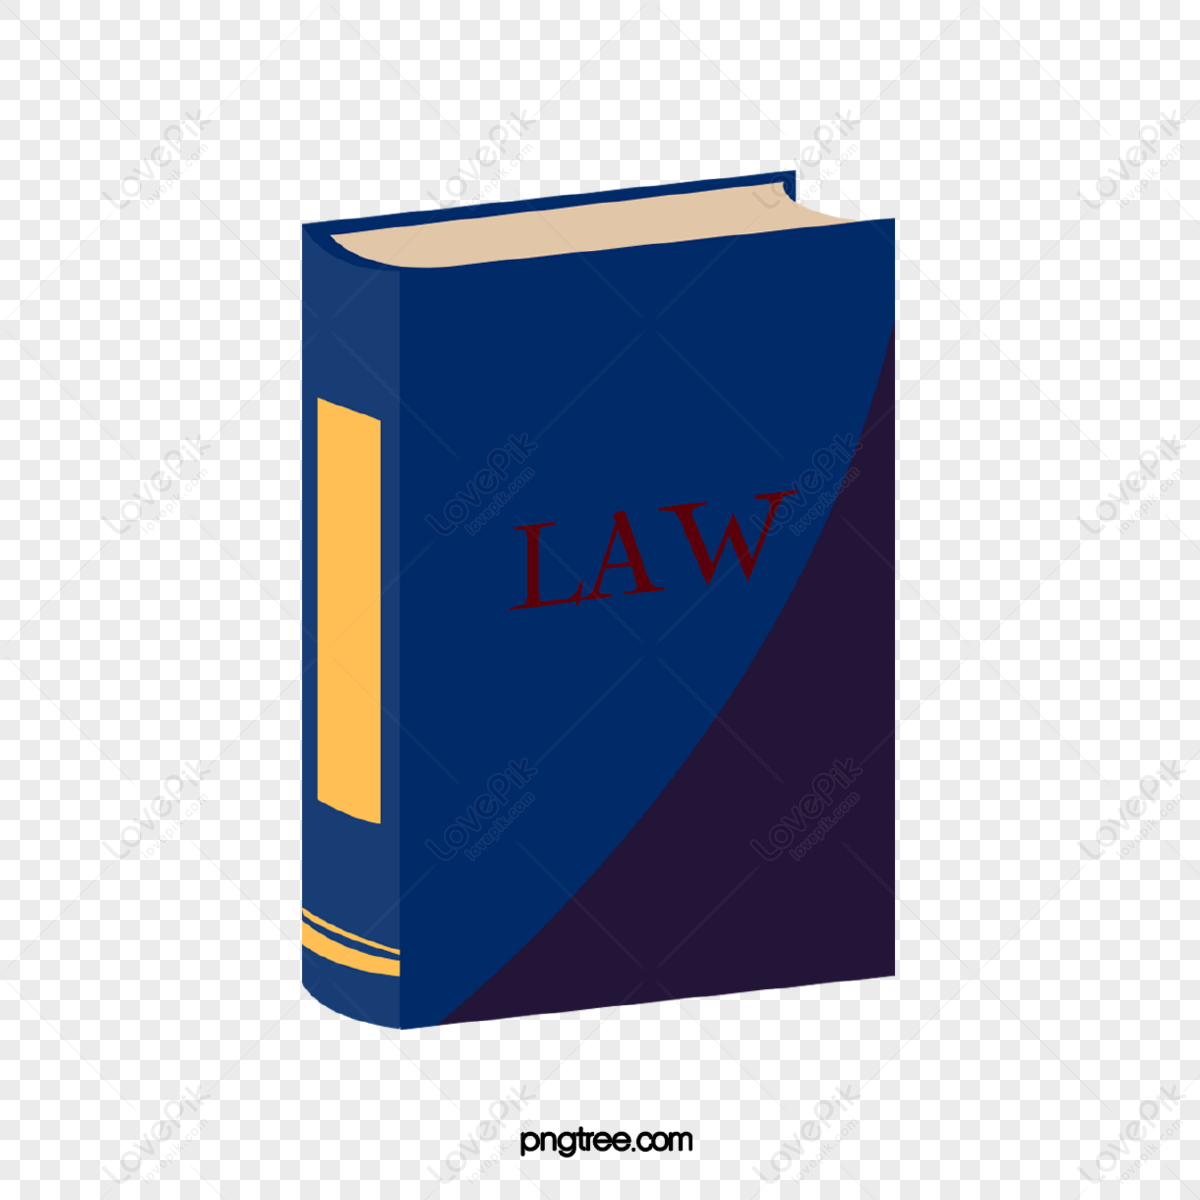 Blue legal office stationery book,office supplies,stationery cartoon,cartoon stationery png hd transparent image